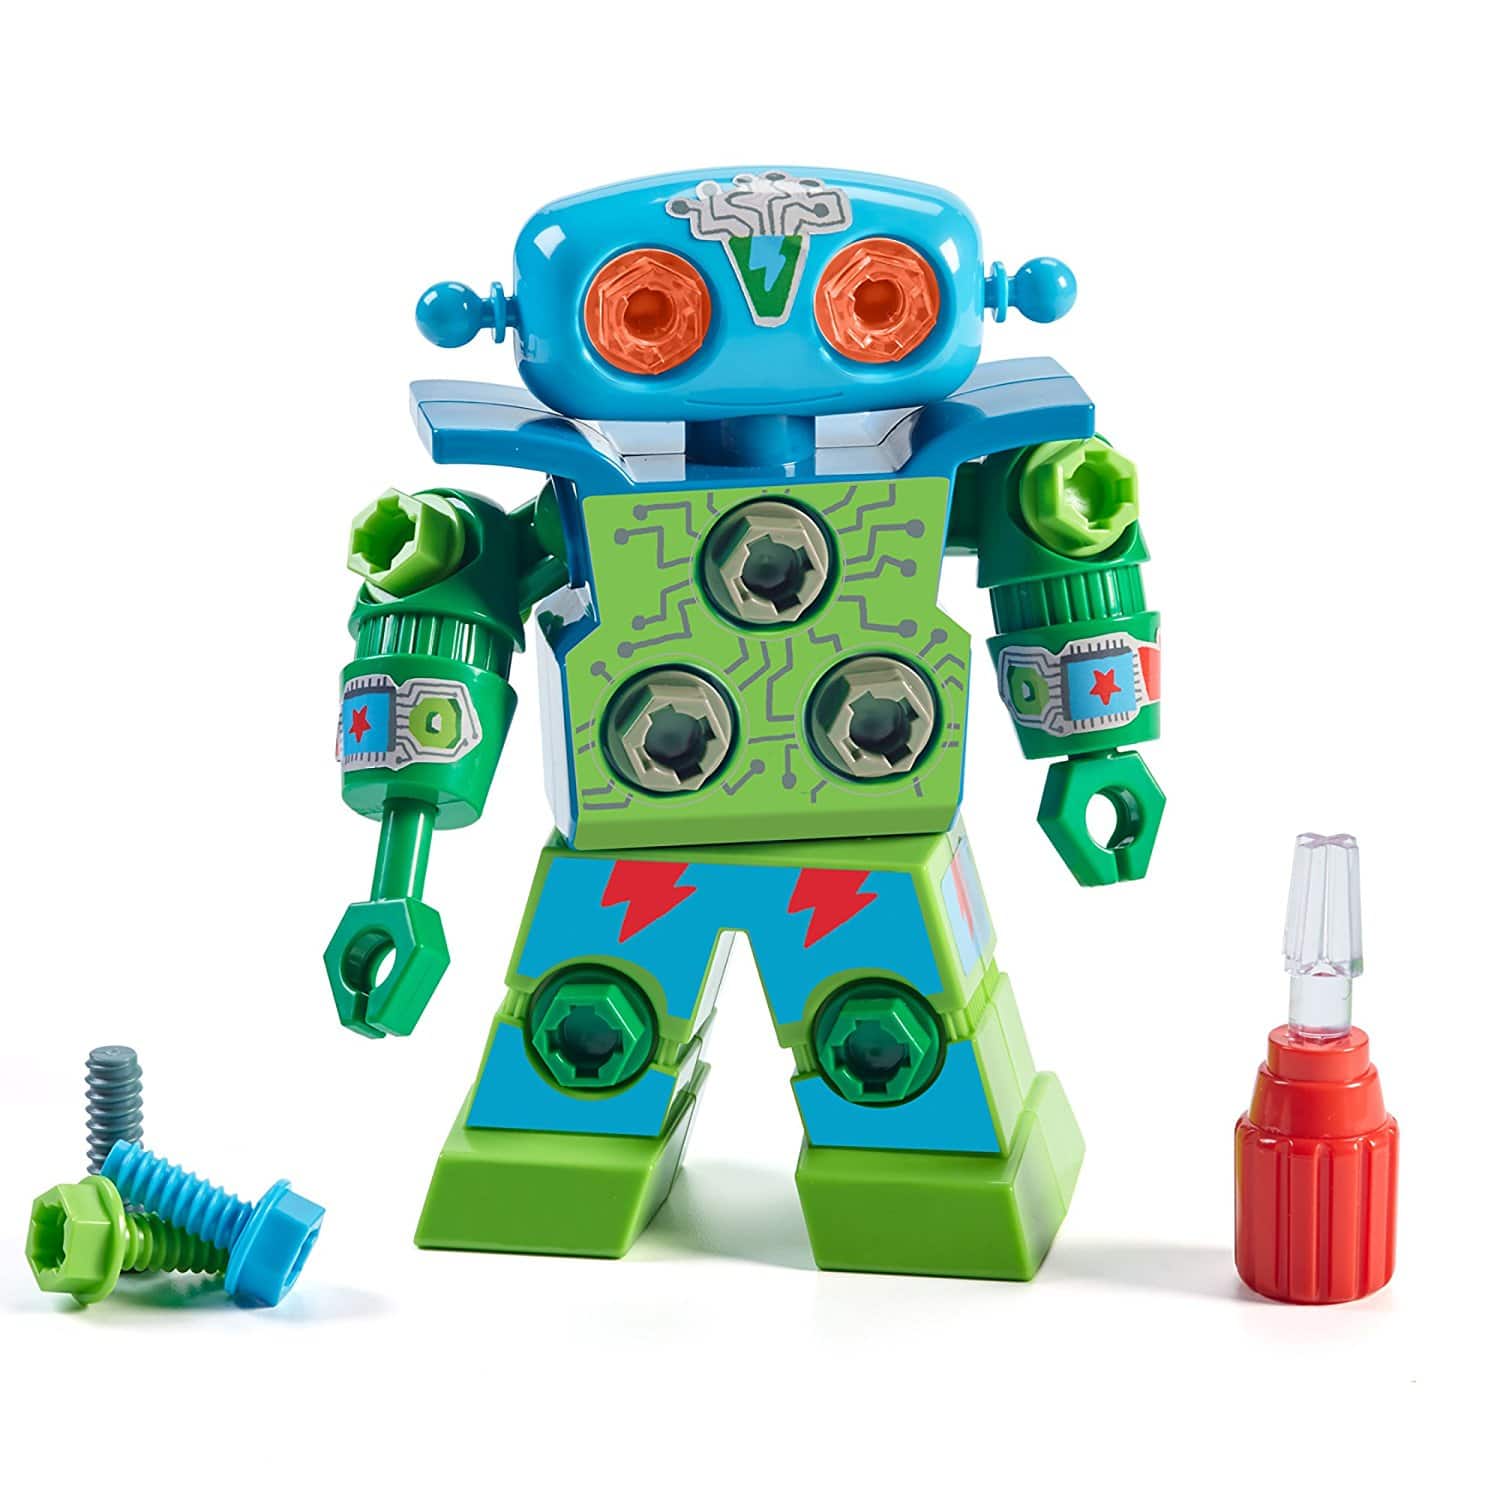 Design & Drill Robot Toy for Kids